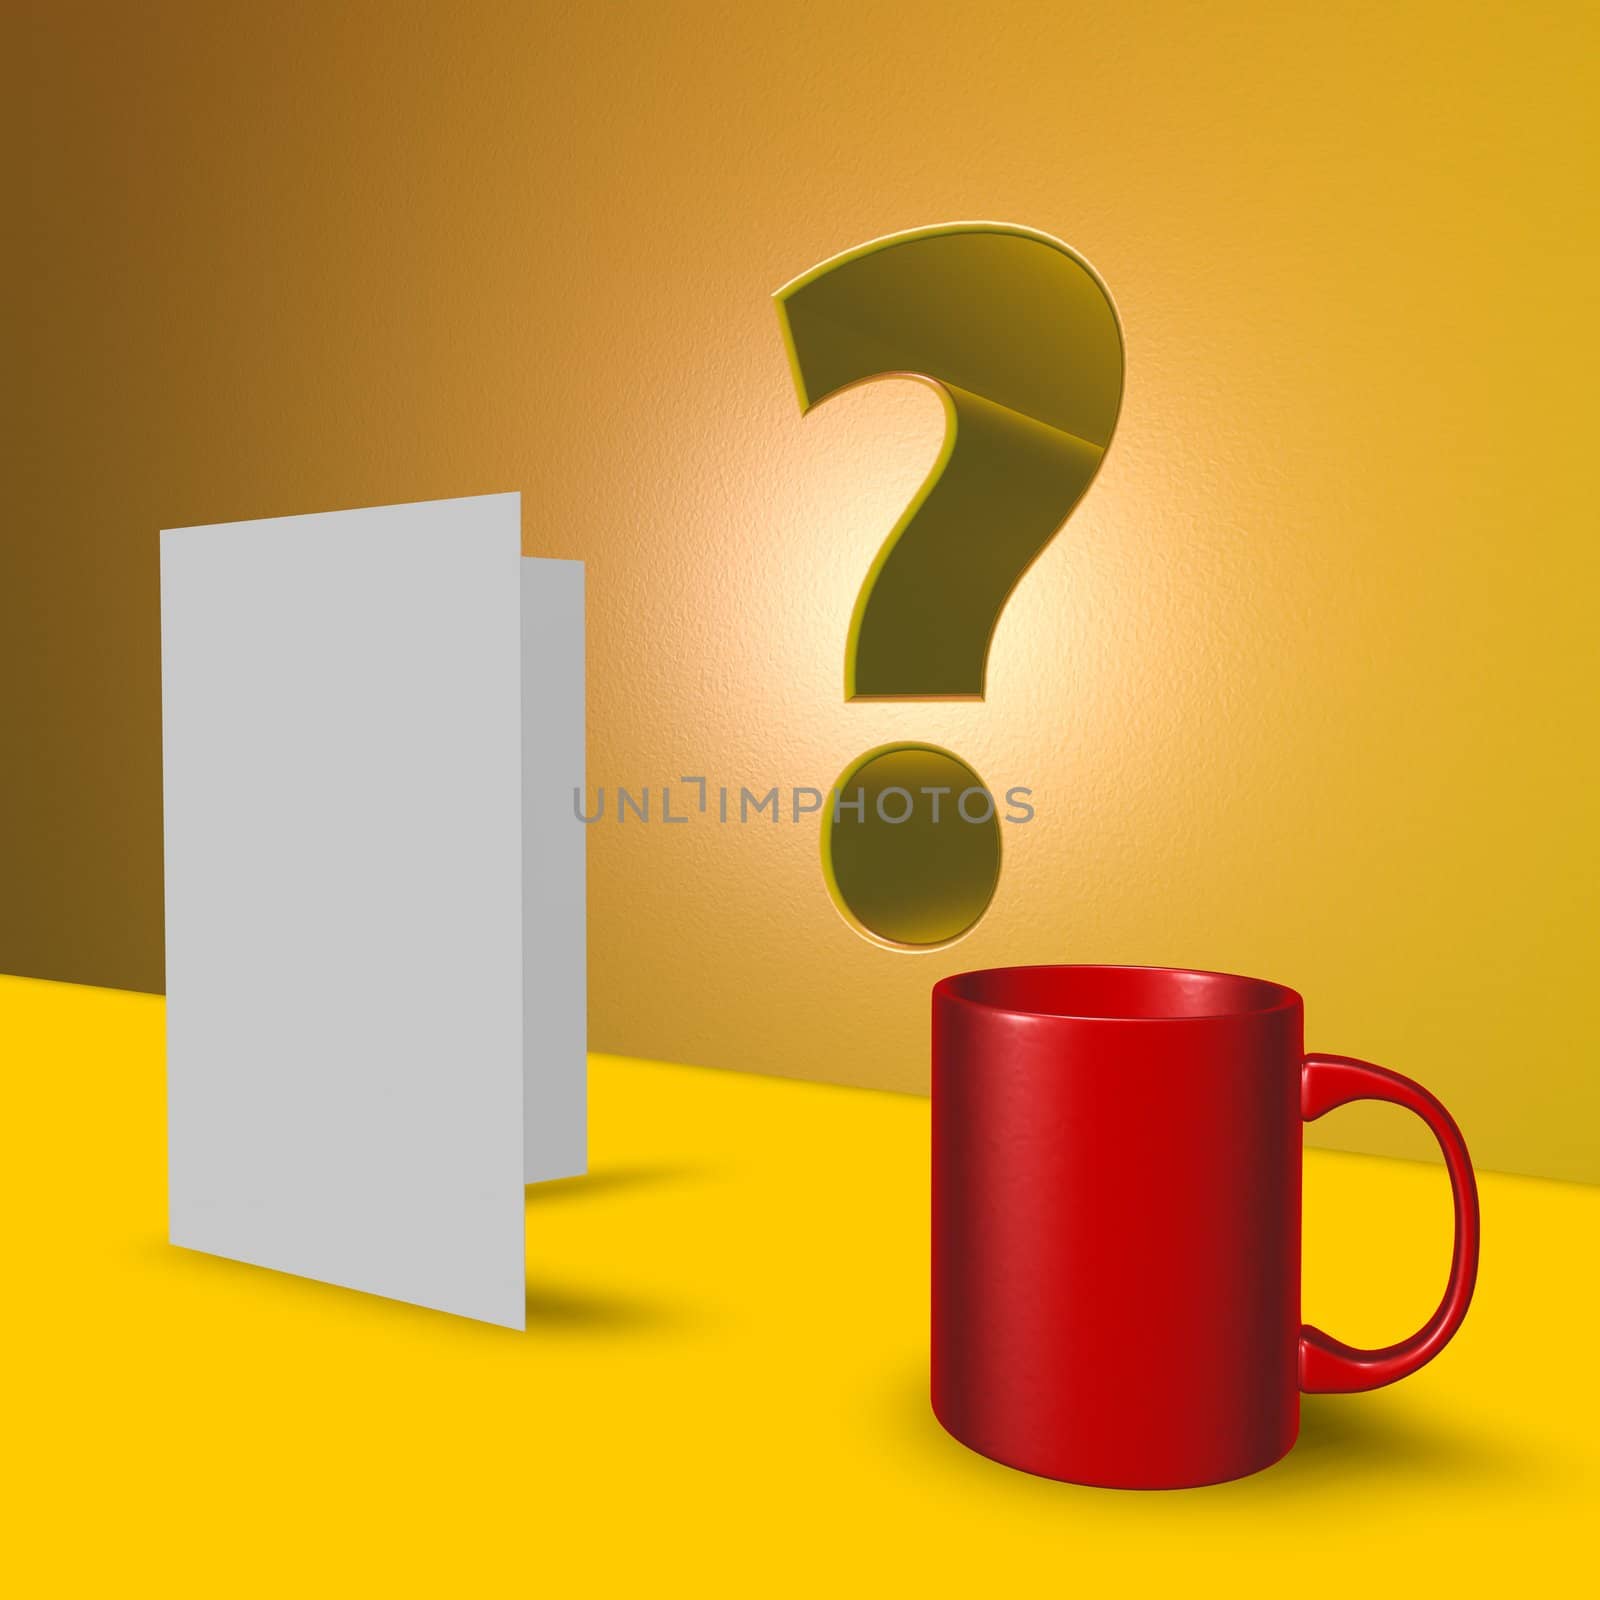 red cup, blank card and question mark - 3d illustration